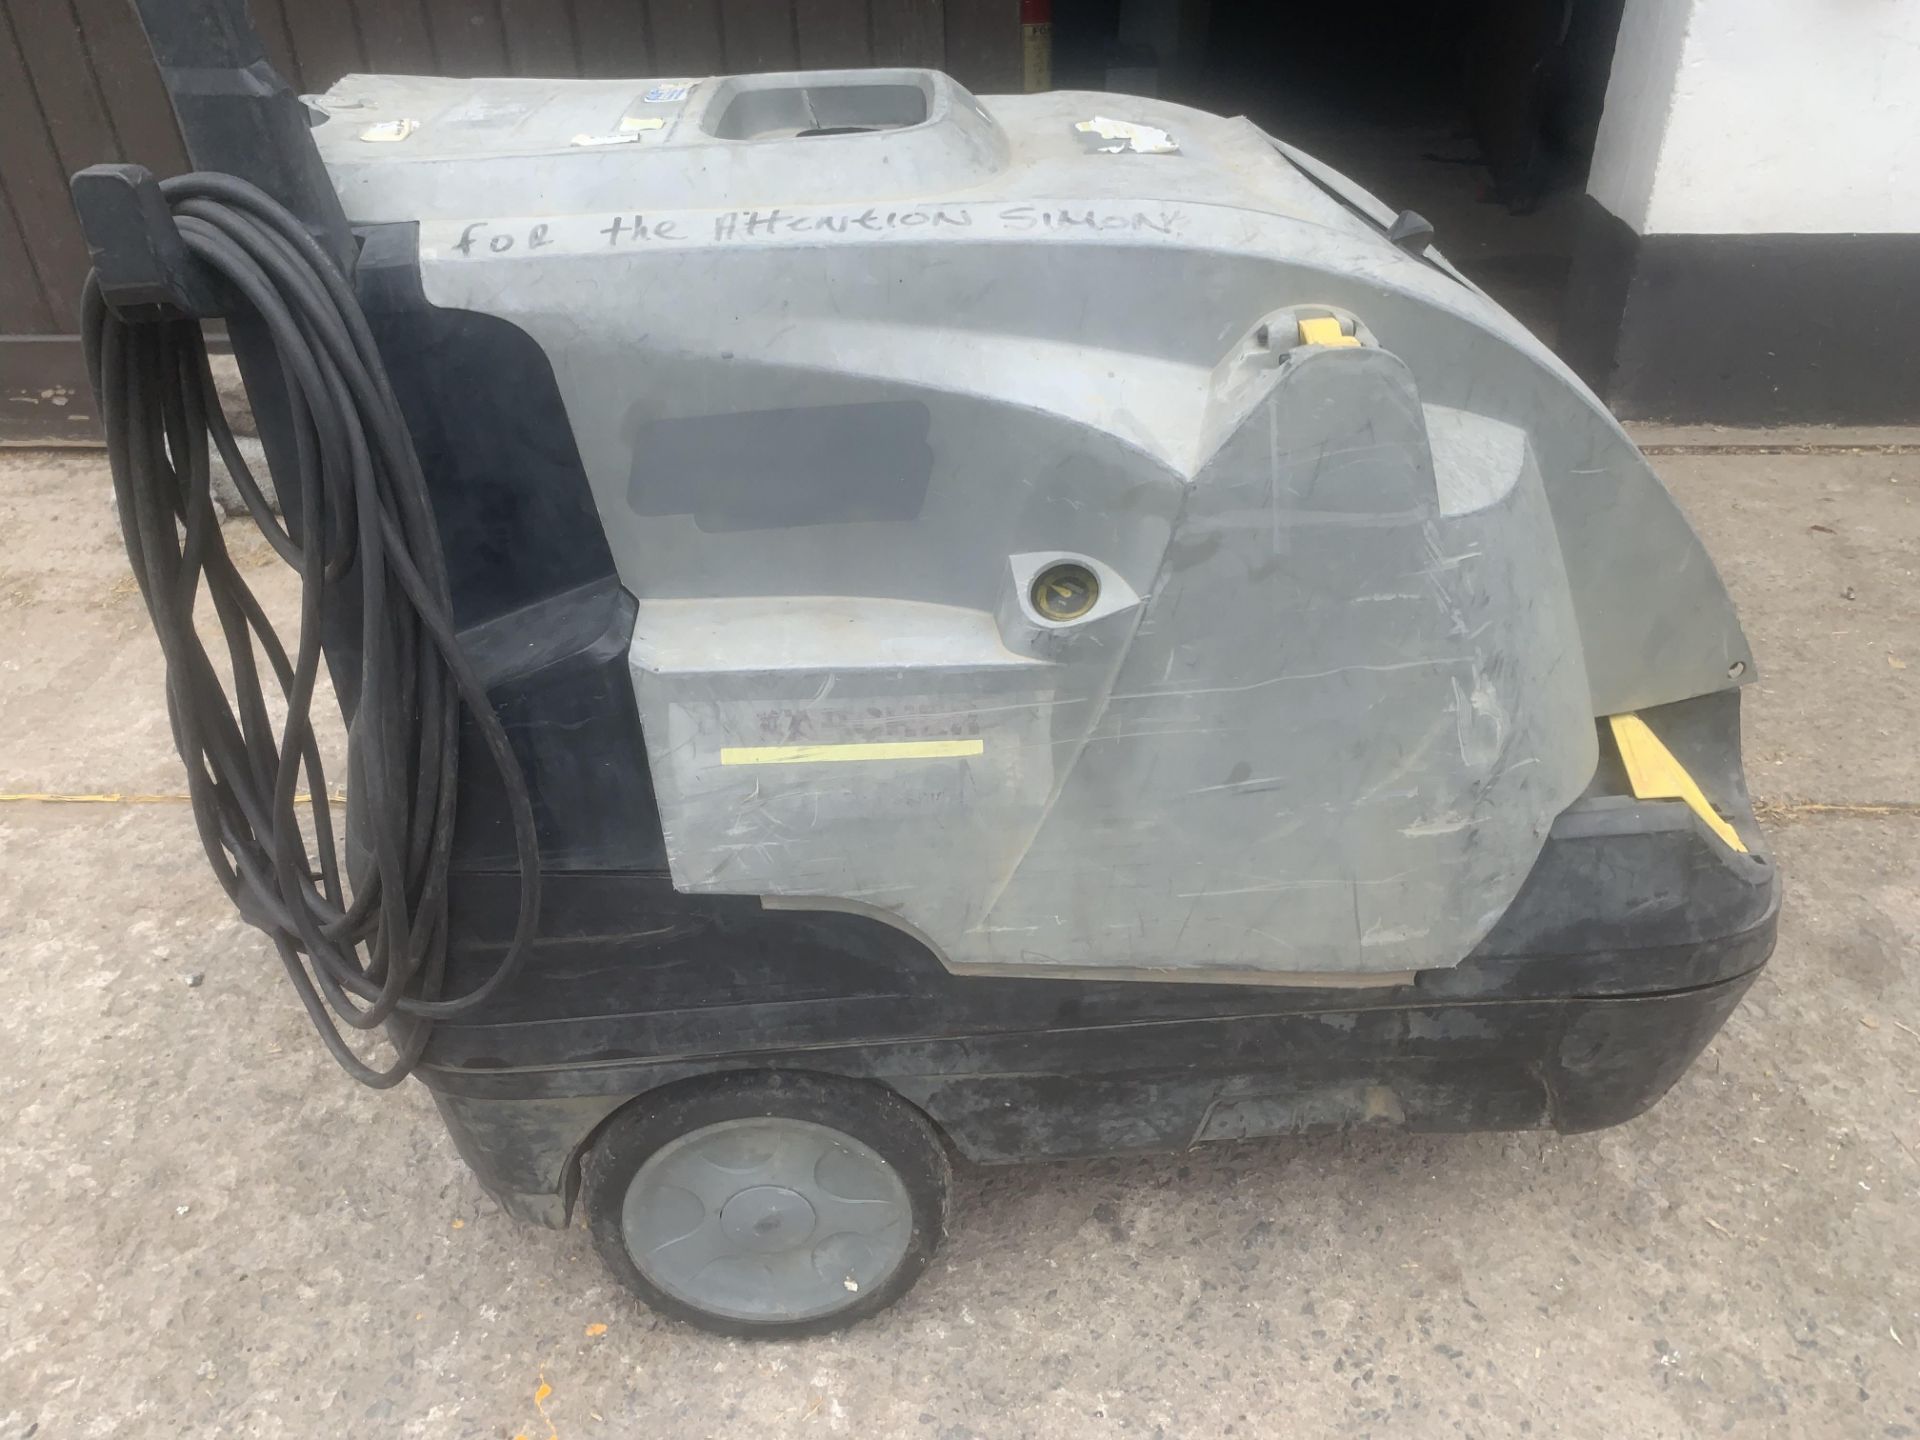 KARCHER PROFEESIONAL HOT AND COLD DIESEL POWER WASHER.LOCATION N IRELAND. - Image 2 of 7